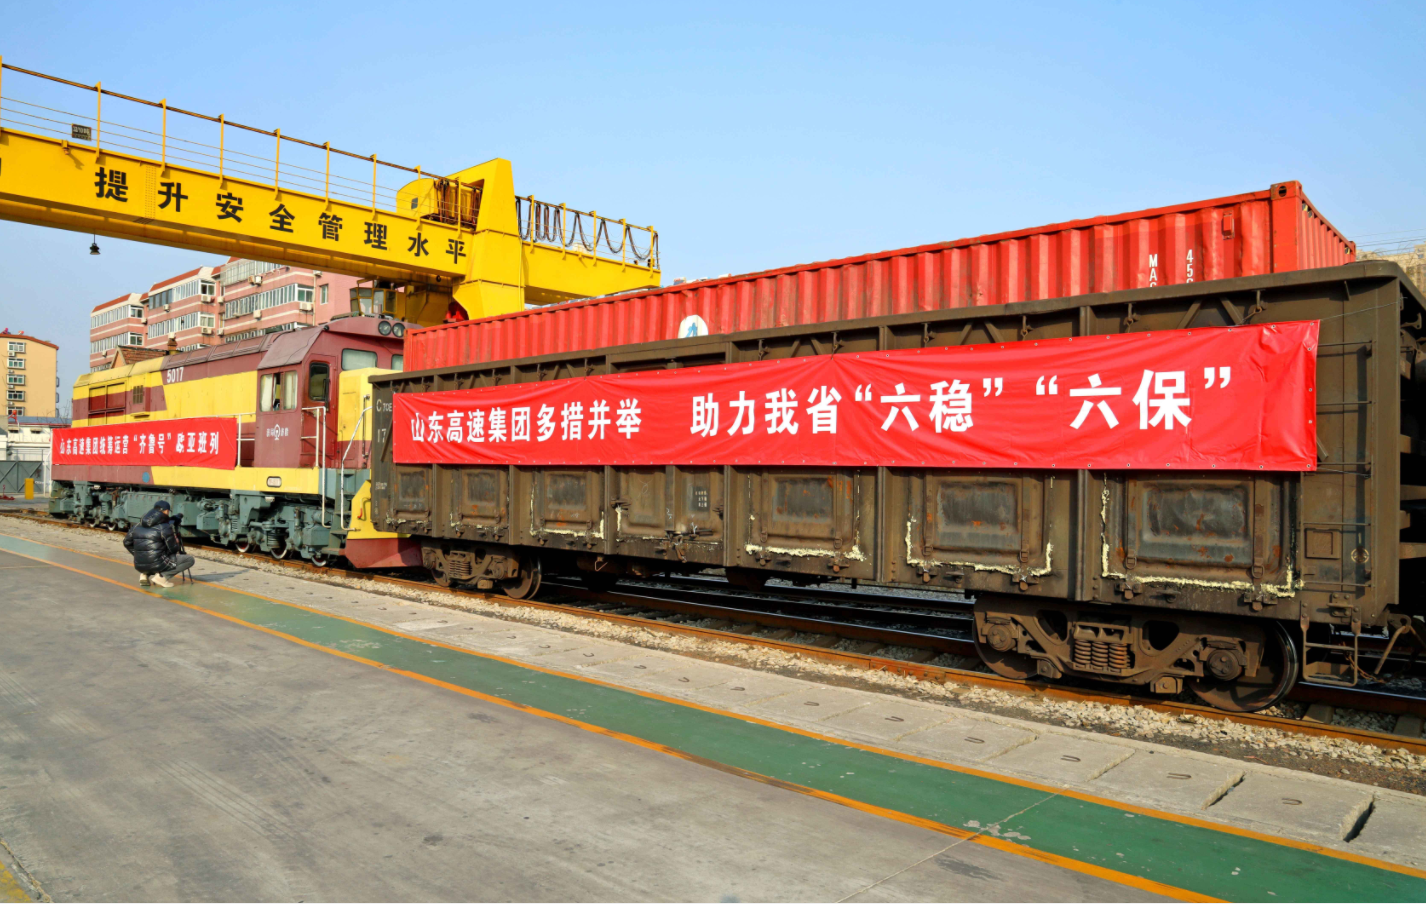 Shandong’s 1st Full Freight Train of Imported Russian Barley Arrived in Ji’nan.